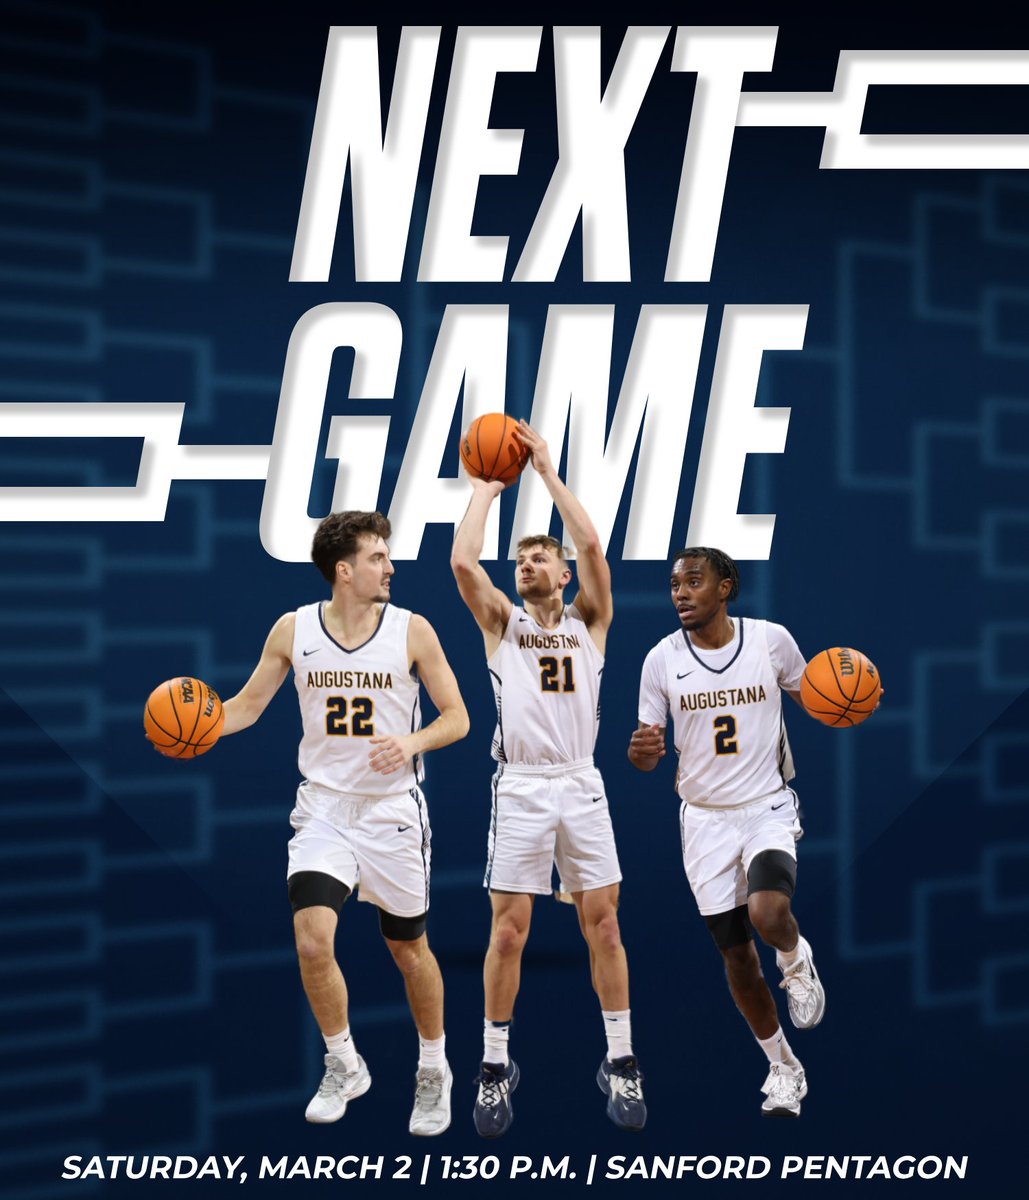 We’ll see you Saturday to take on Minnesota Duluth! Tickets ➡️Ticketmaster.com or Sanford Pentagon Box Office #BuildingChampions